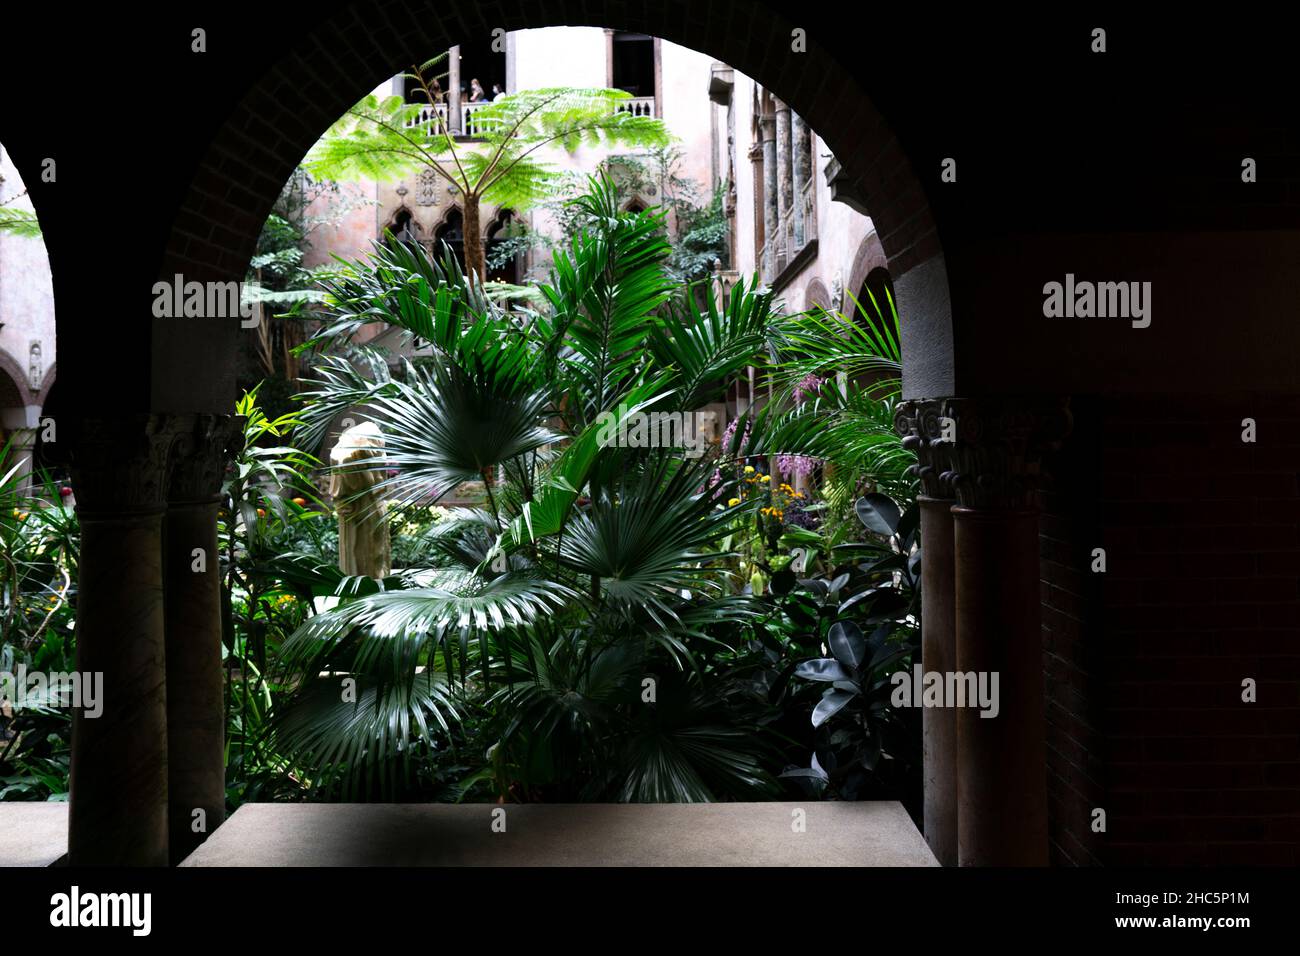 Boston, USA - October 22, 2021: View of the courtyard of Isabella Stewart Gardner Museum in Boston. It has collection of paintings, sculpture, tapestr Stock Photo